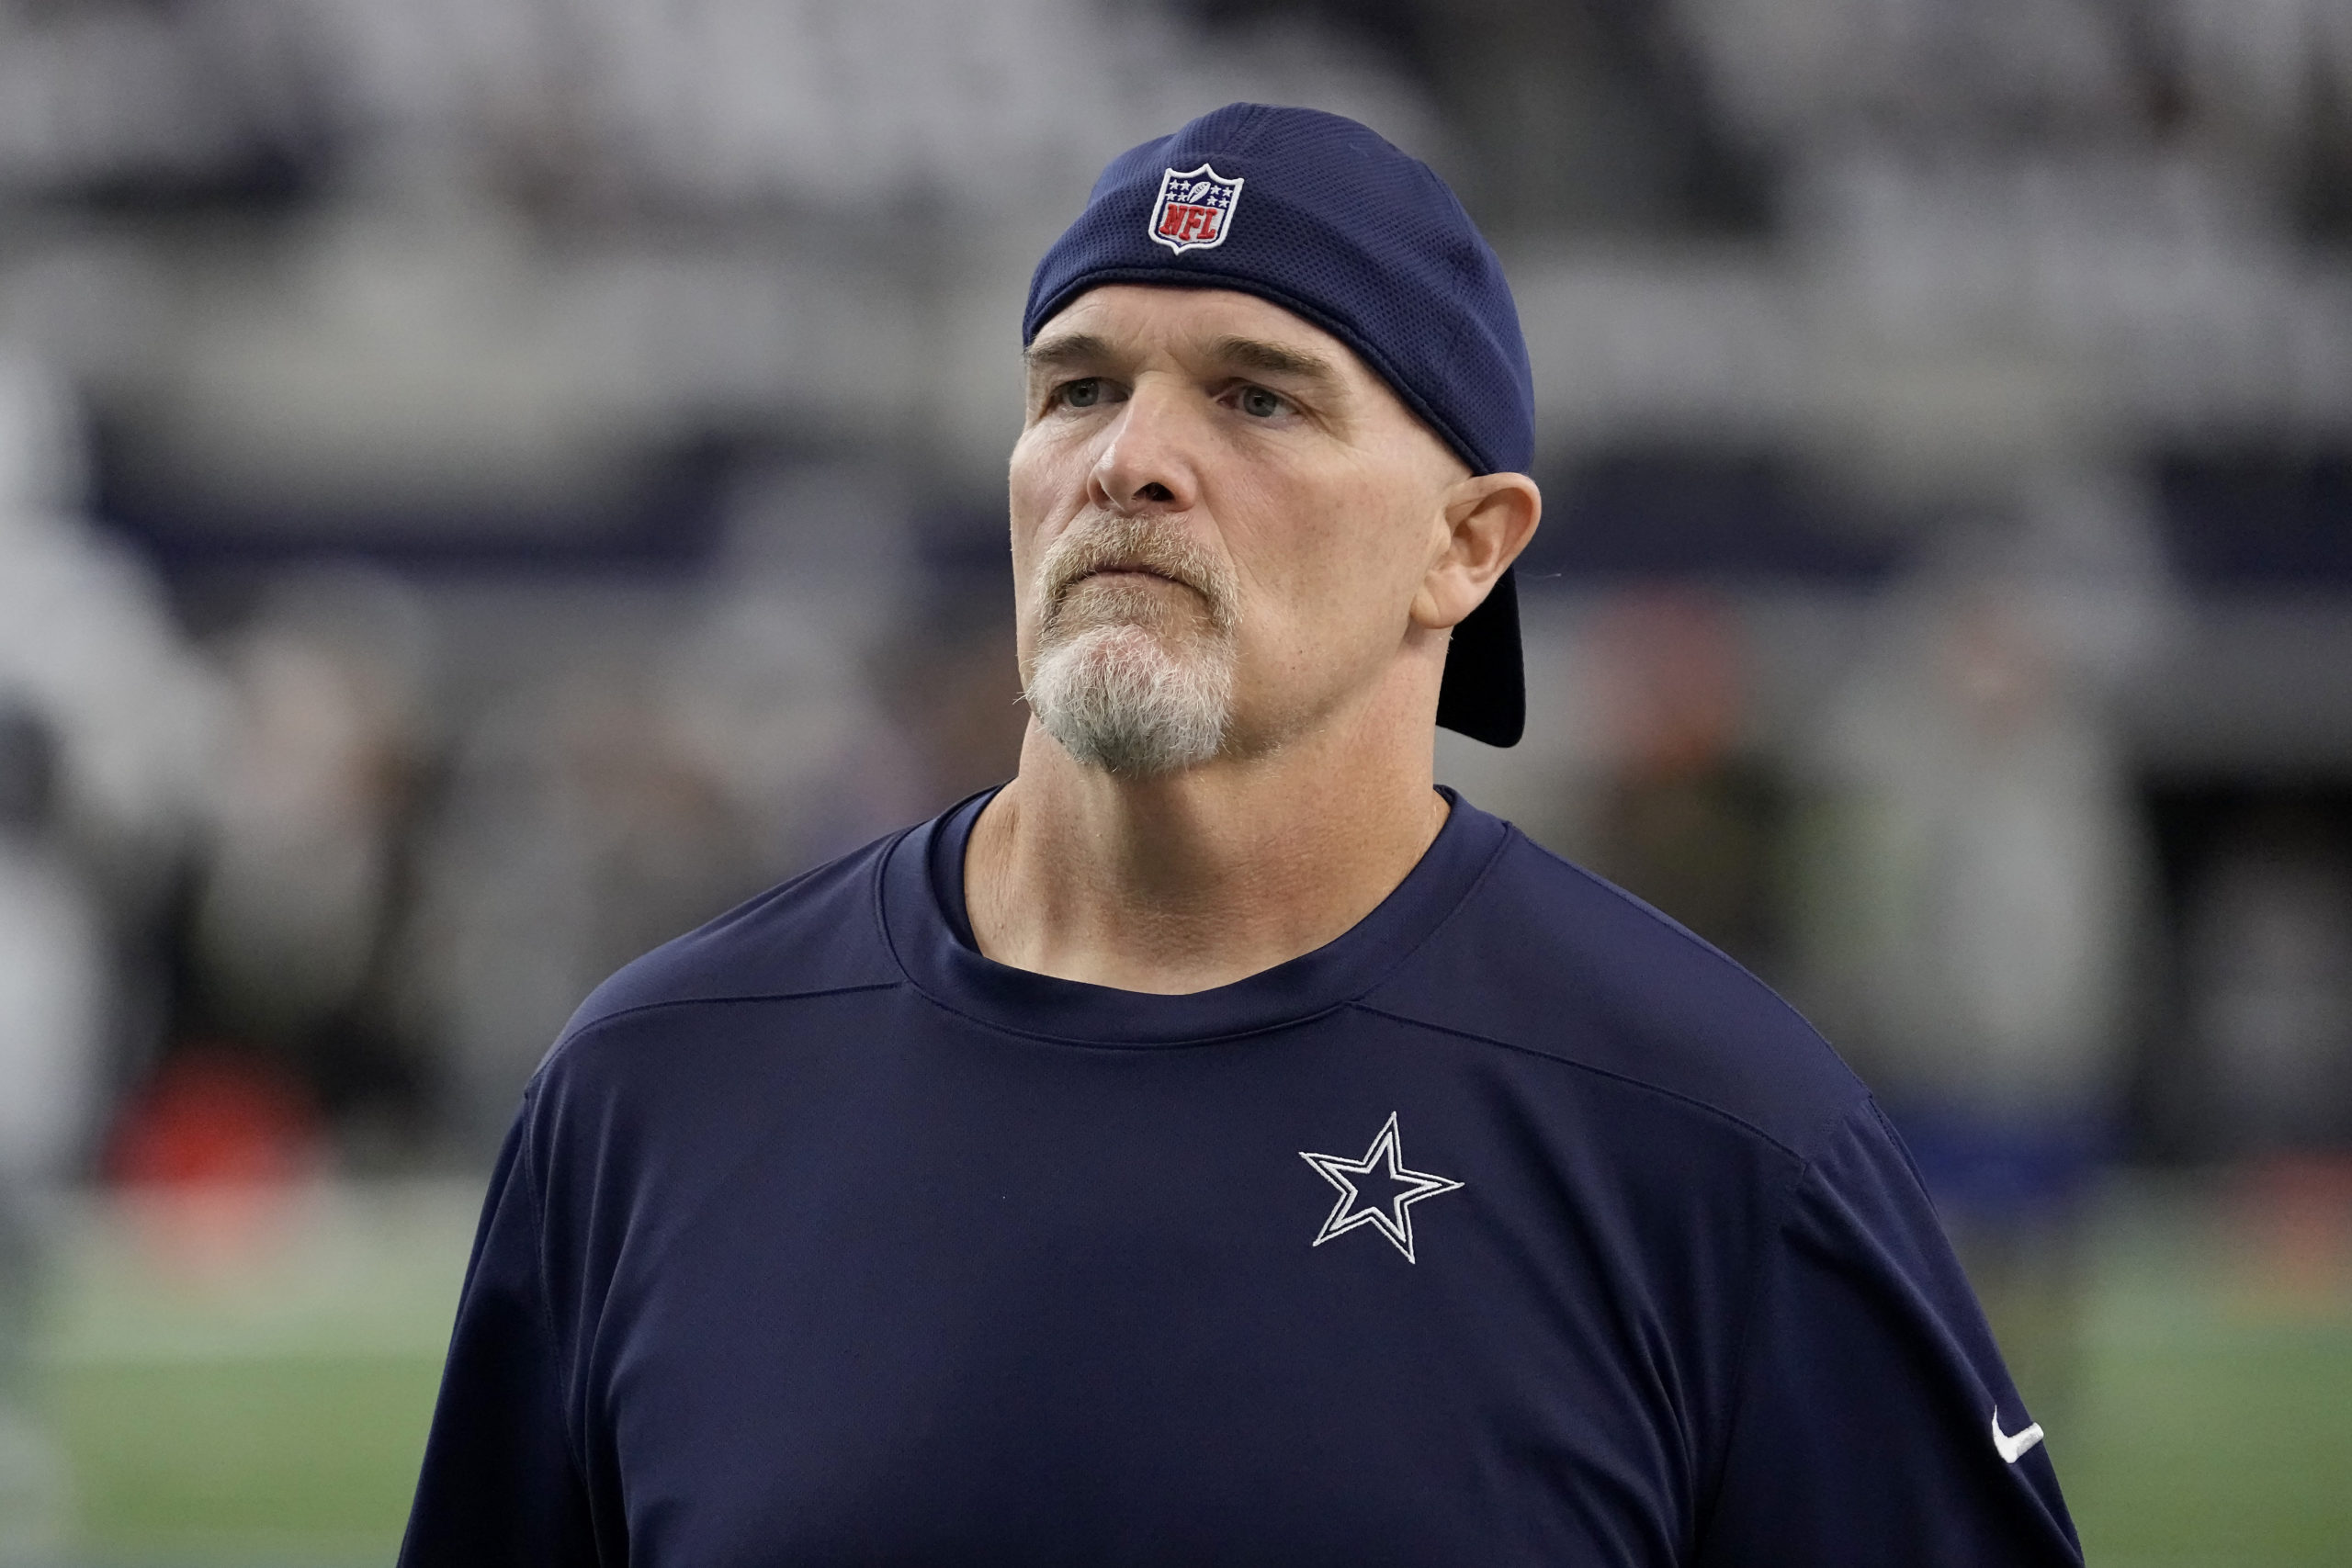 Dallas Cowboys defensive coordinator Dan Quinn watches players warm up for an NFL football game against the Washington Commanders in Arlington, Texas, on Nov. 23.